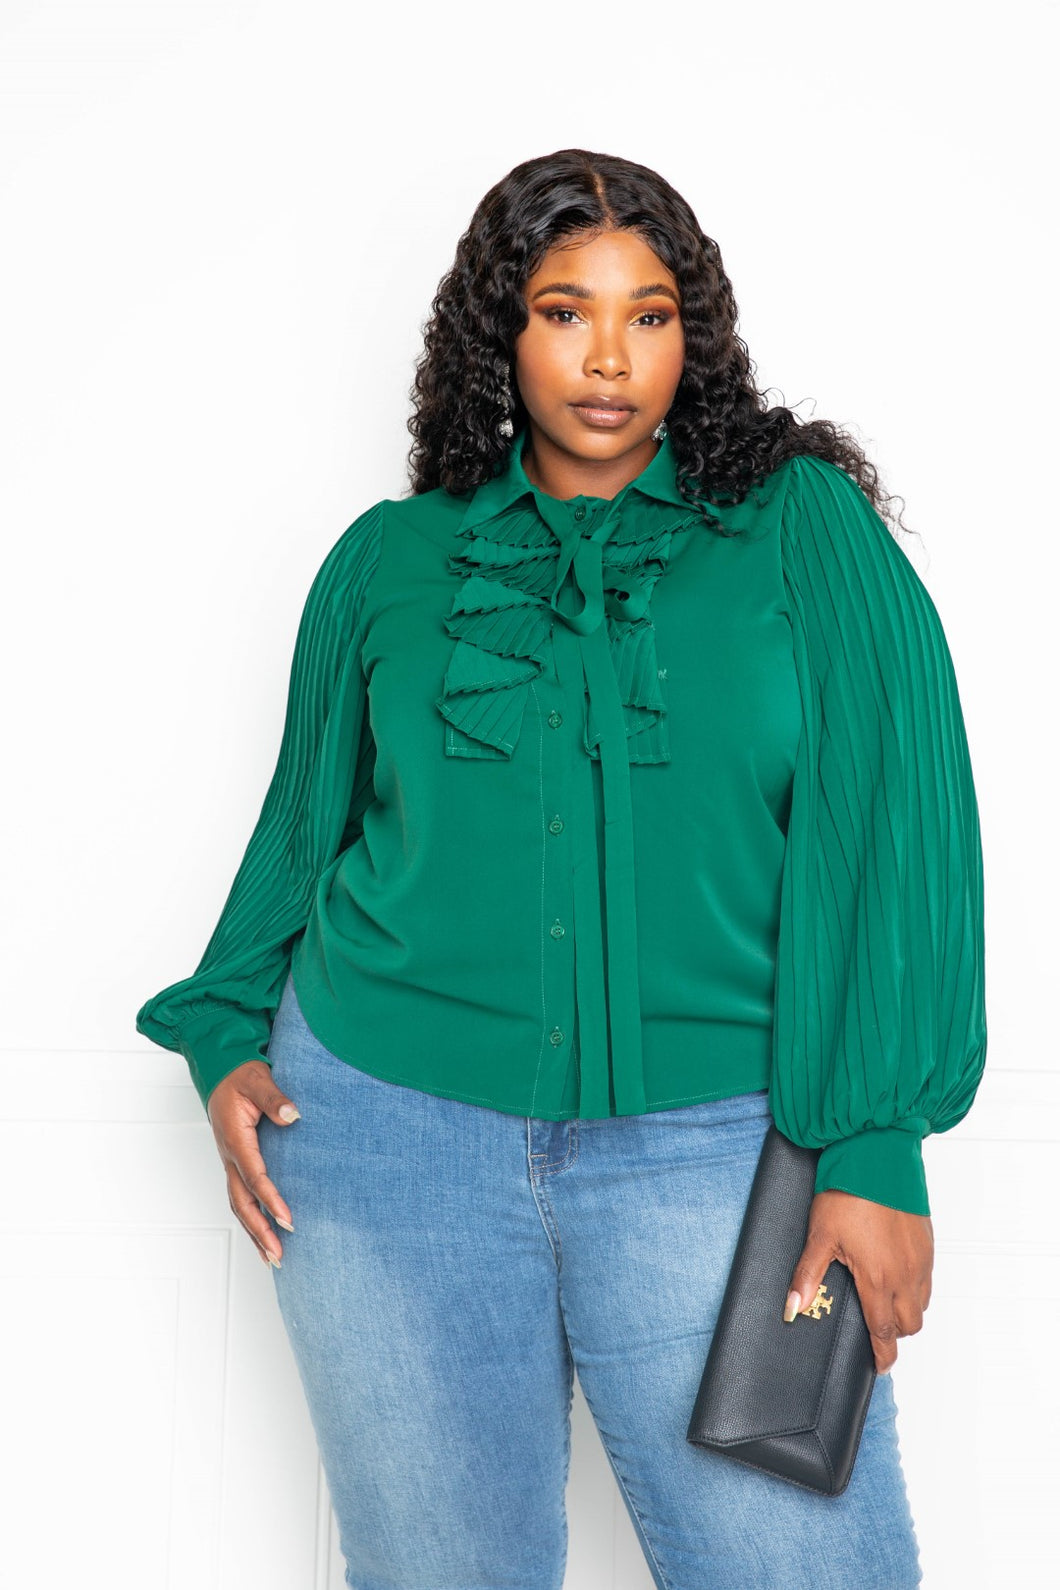 2 COLORS | PLUS SIZE | Pleated Sleeve Blouse With Waterfall Frill And Bow